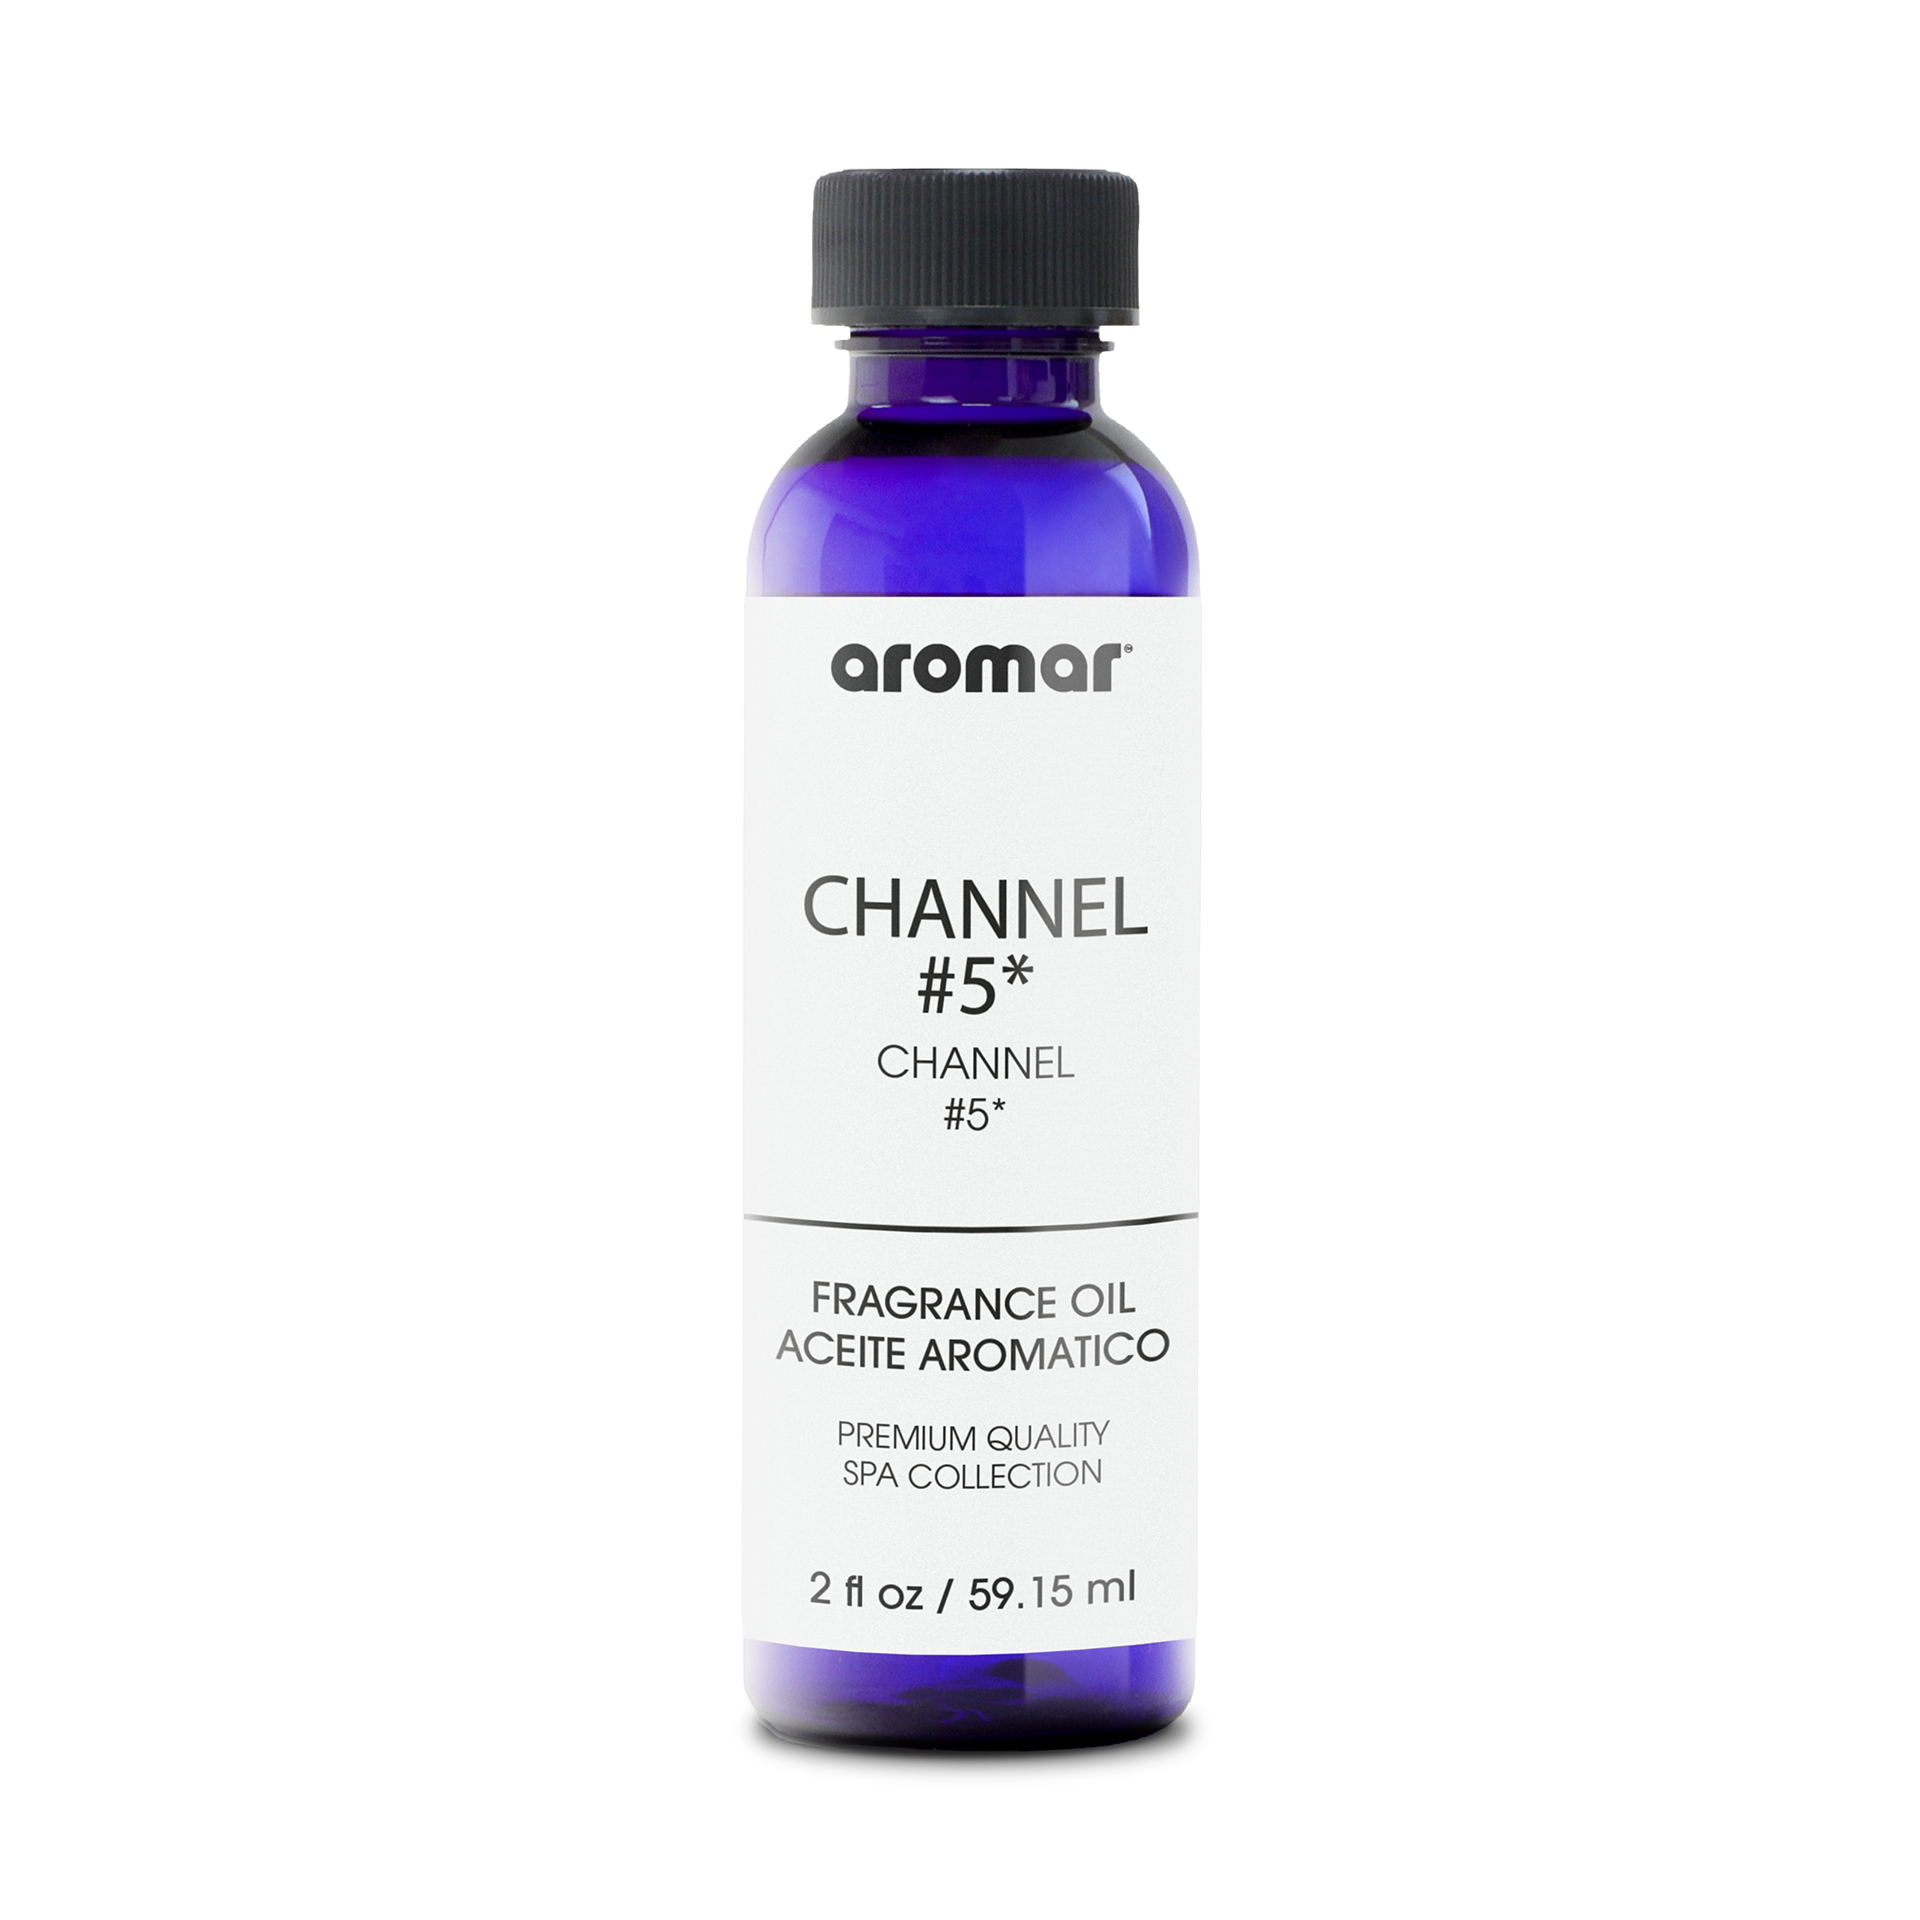 #5 Chanel (our version) Fragrance Oil